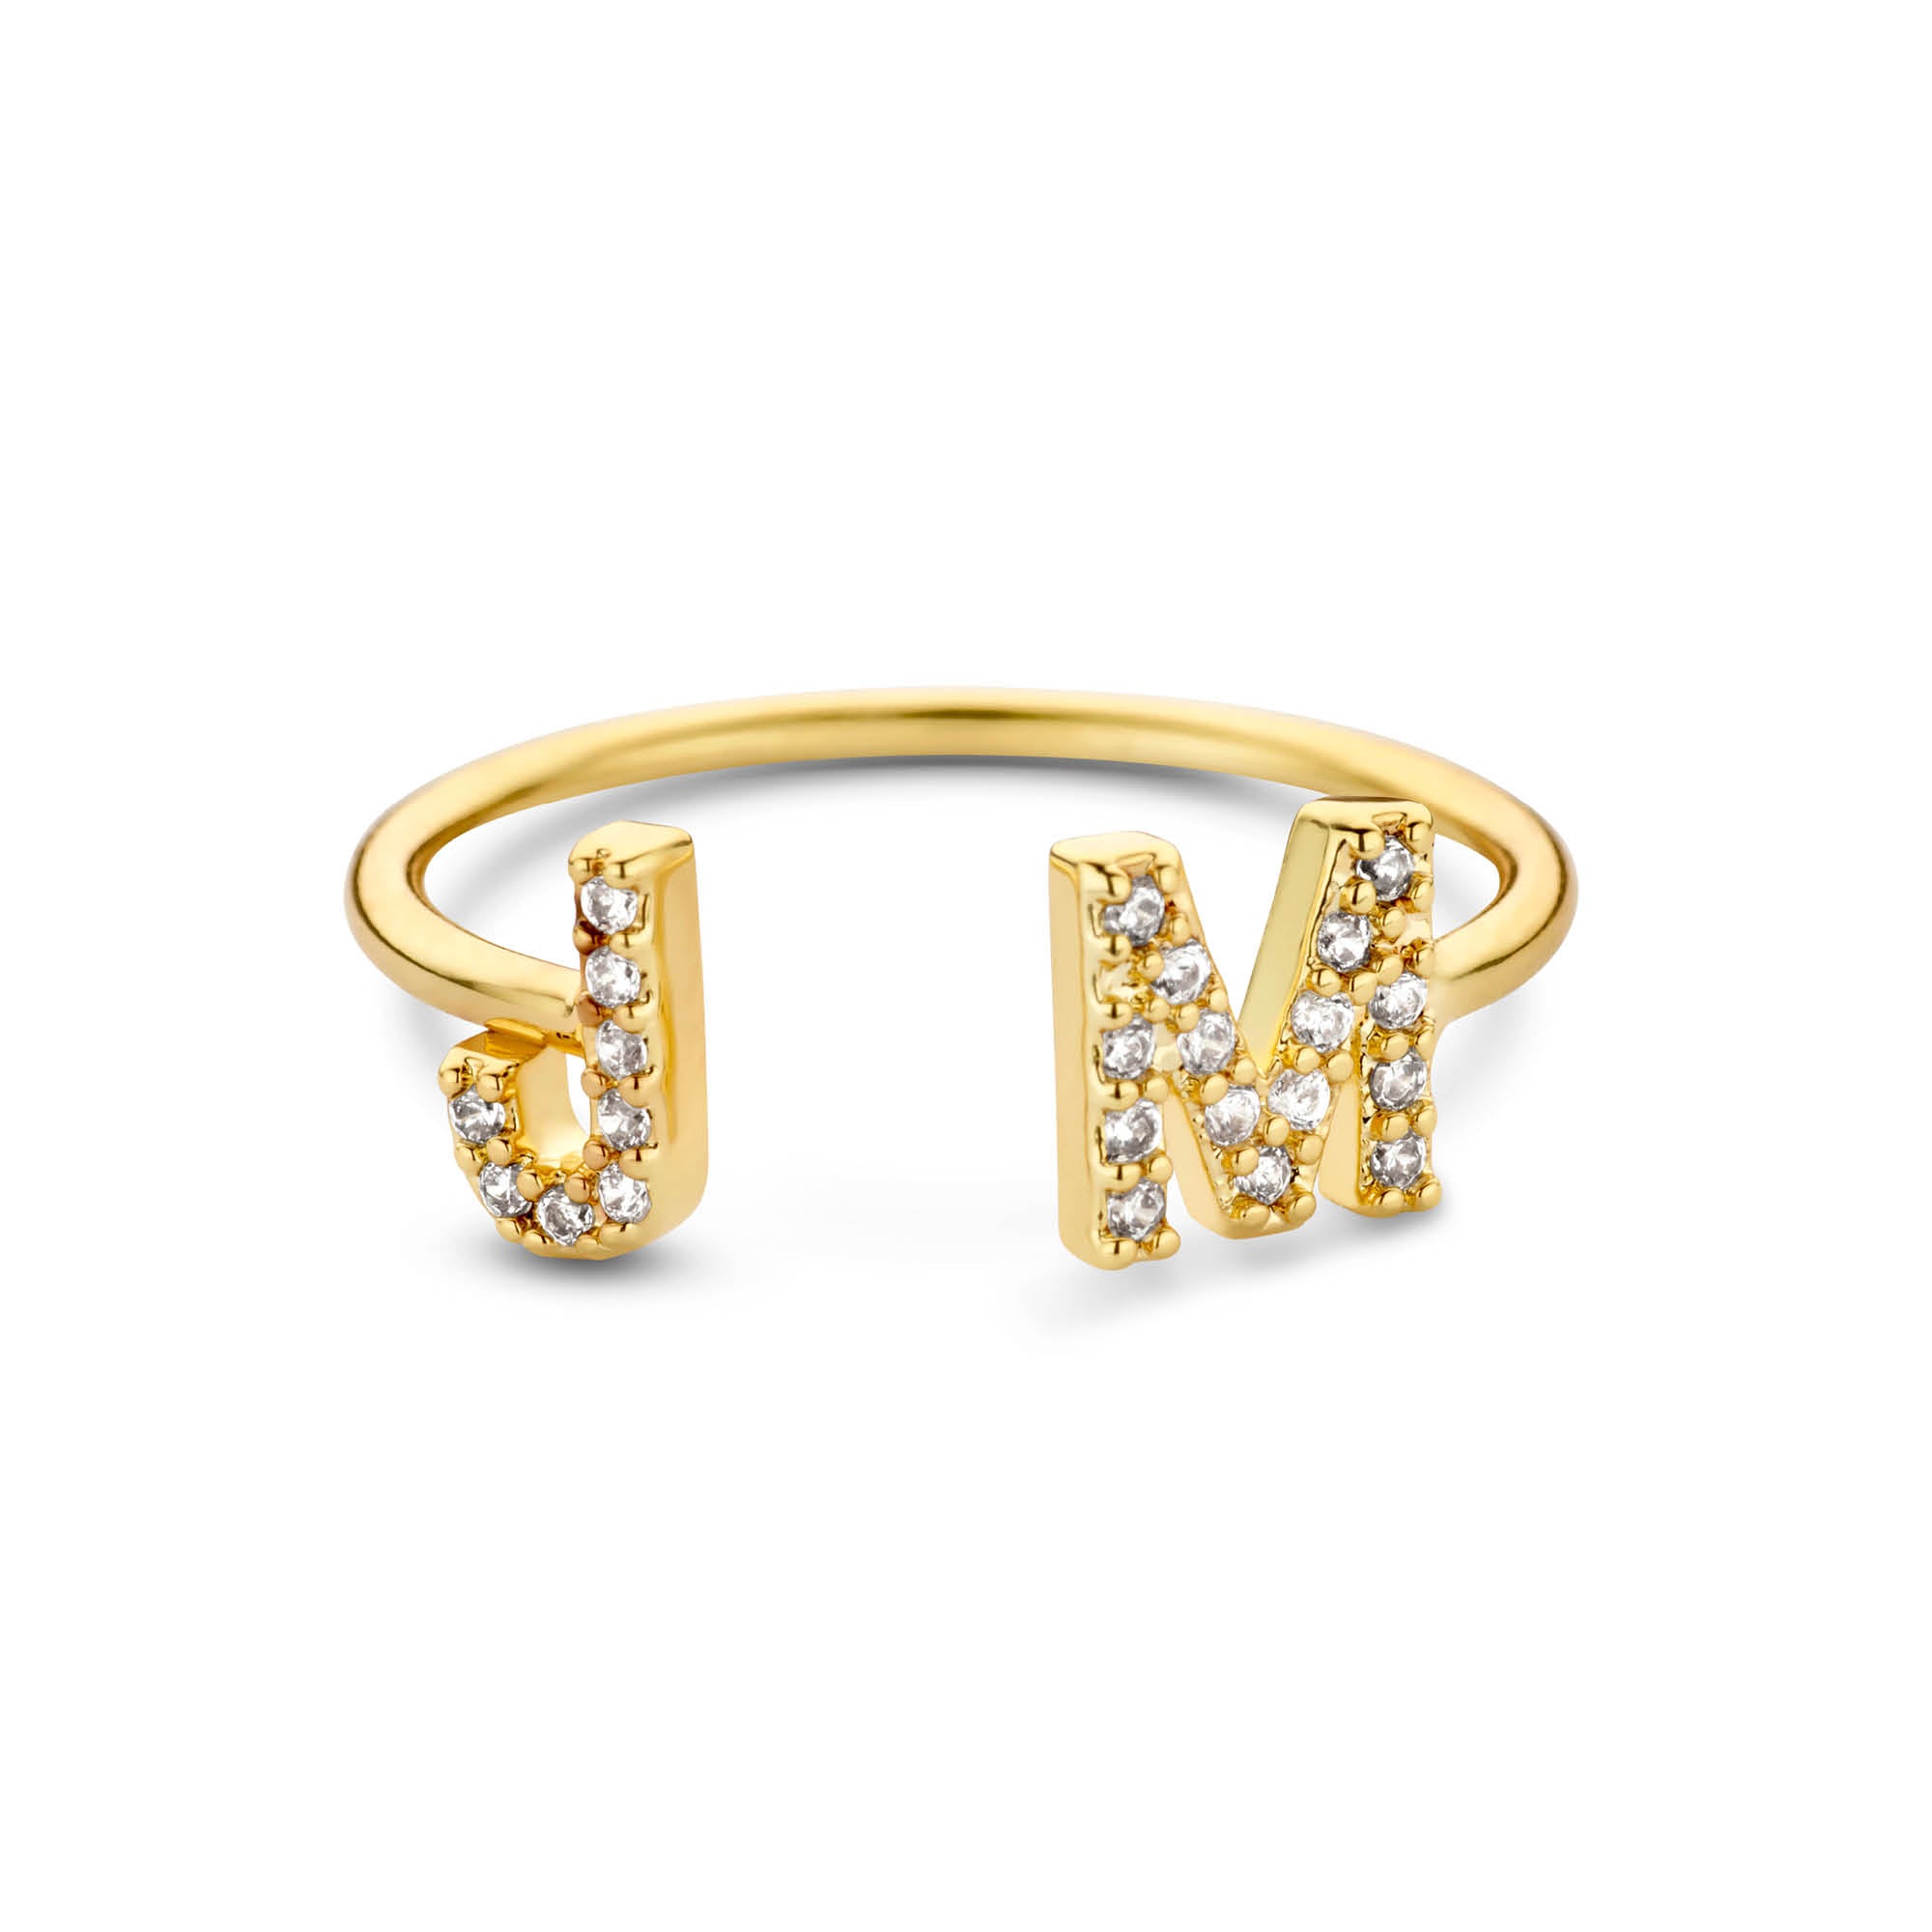 Custommade 2 Initial Ring [2 initialen]